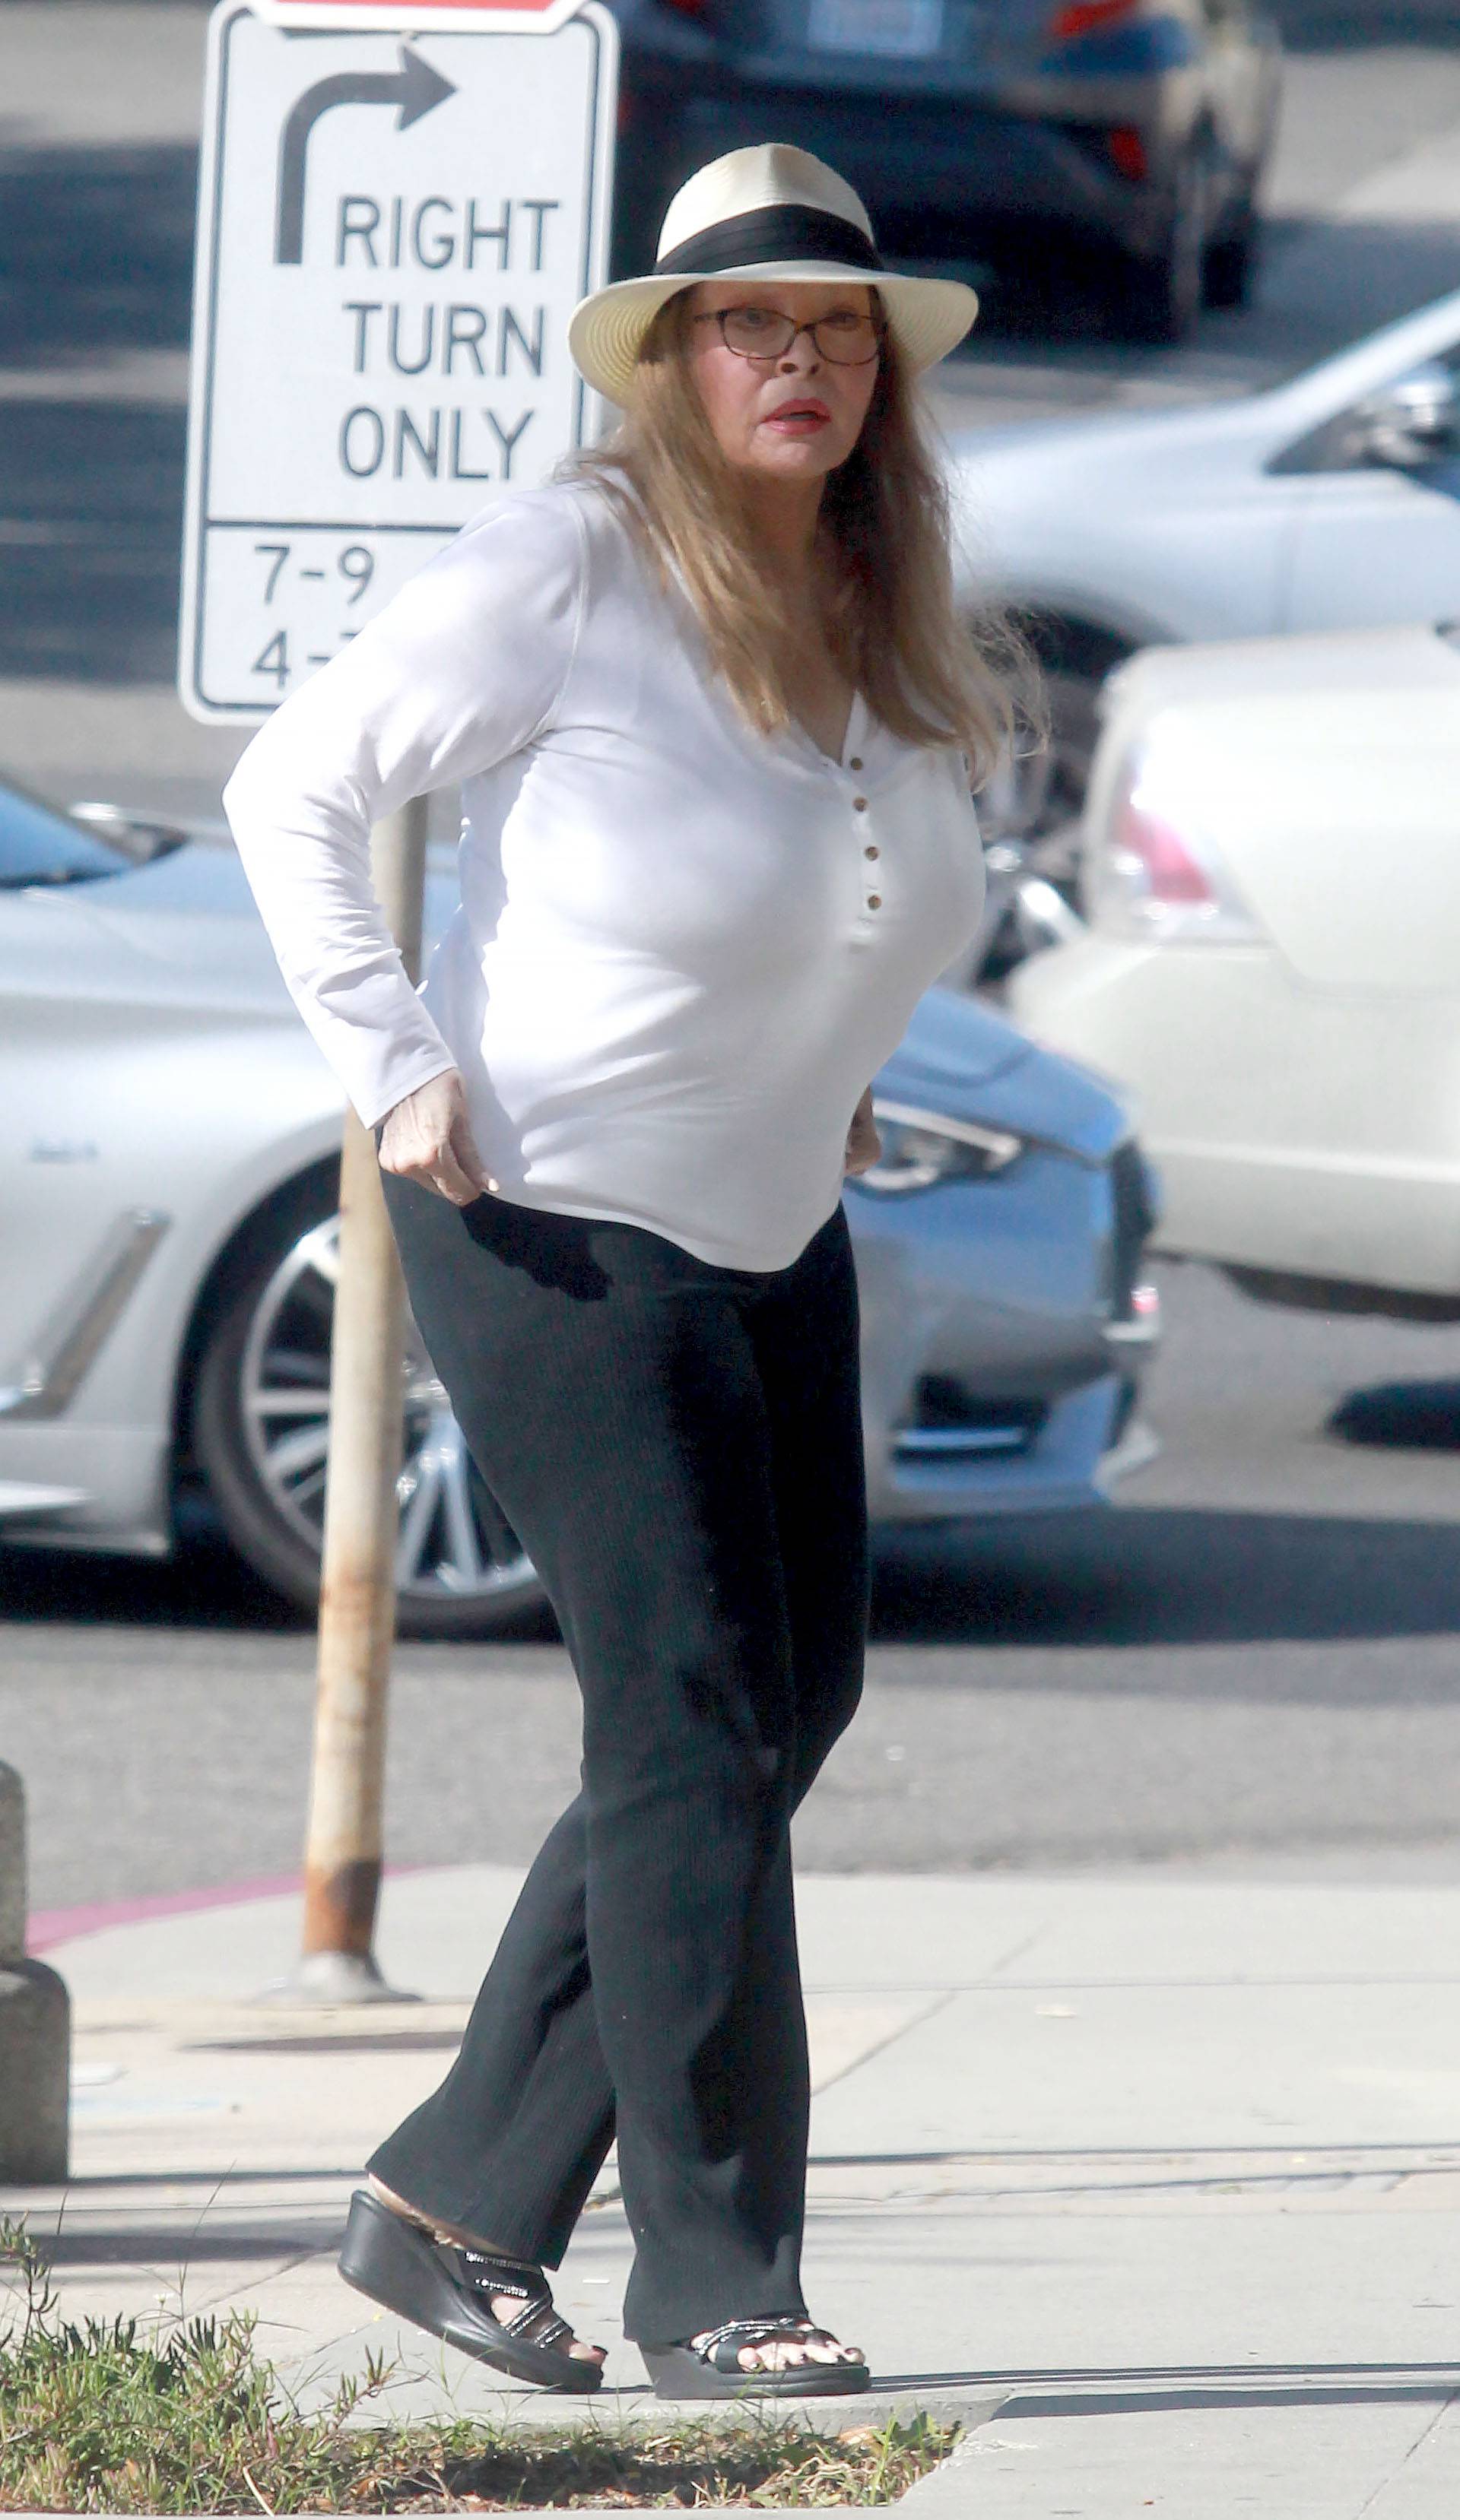 Sixties superstar Raquel Welch, 81, is seen out in public for the first time in over two years as she stops by an auction house in Beverly Hills.